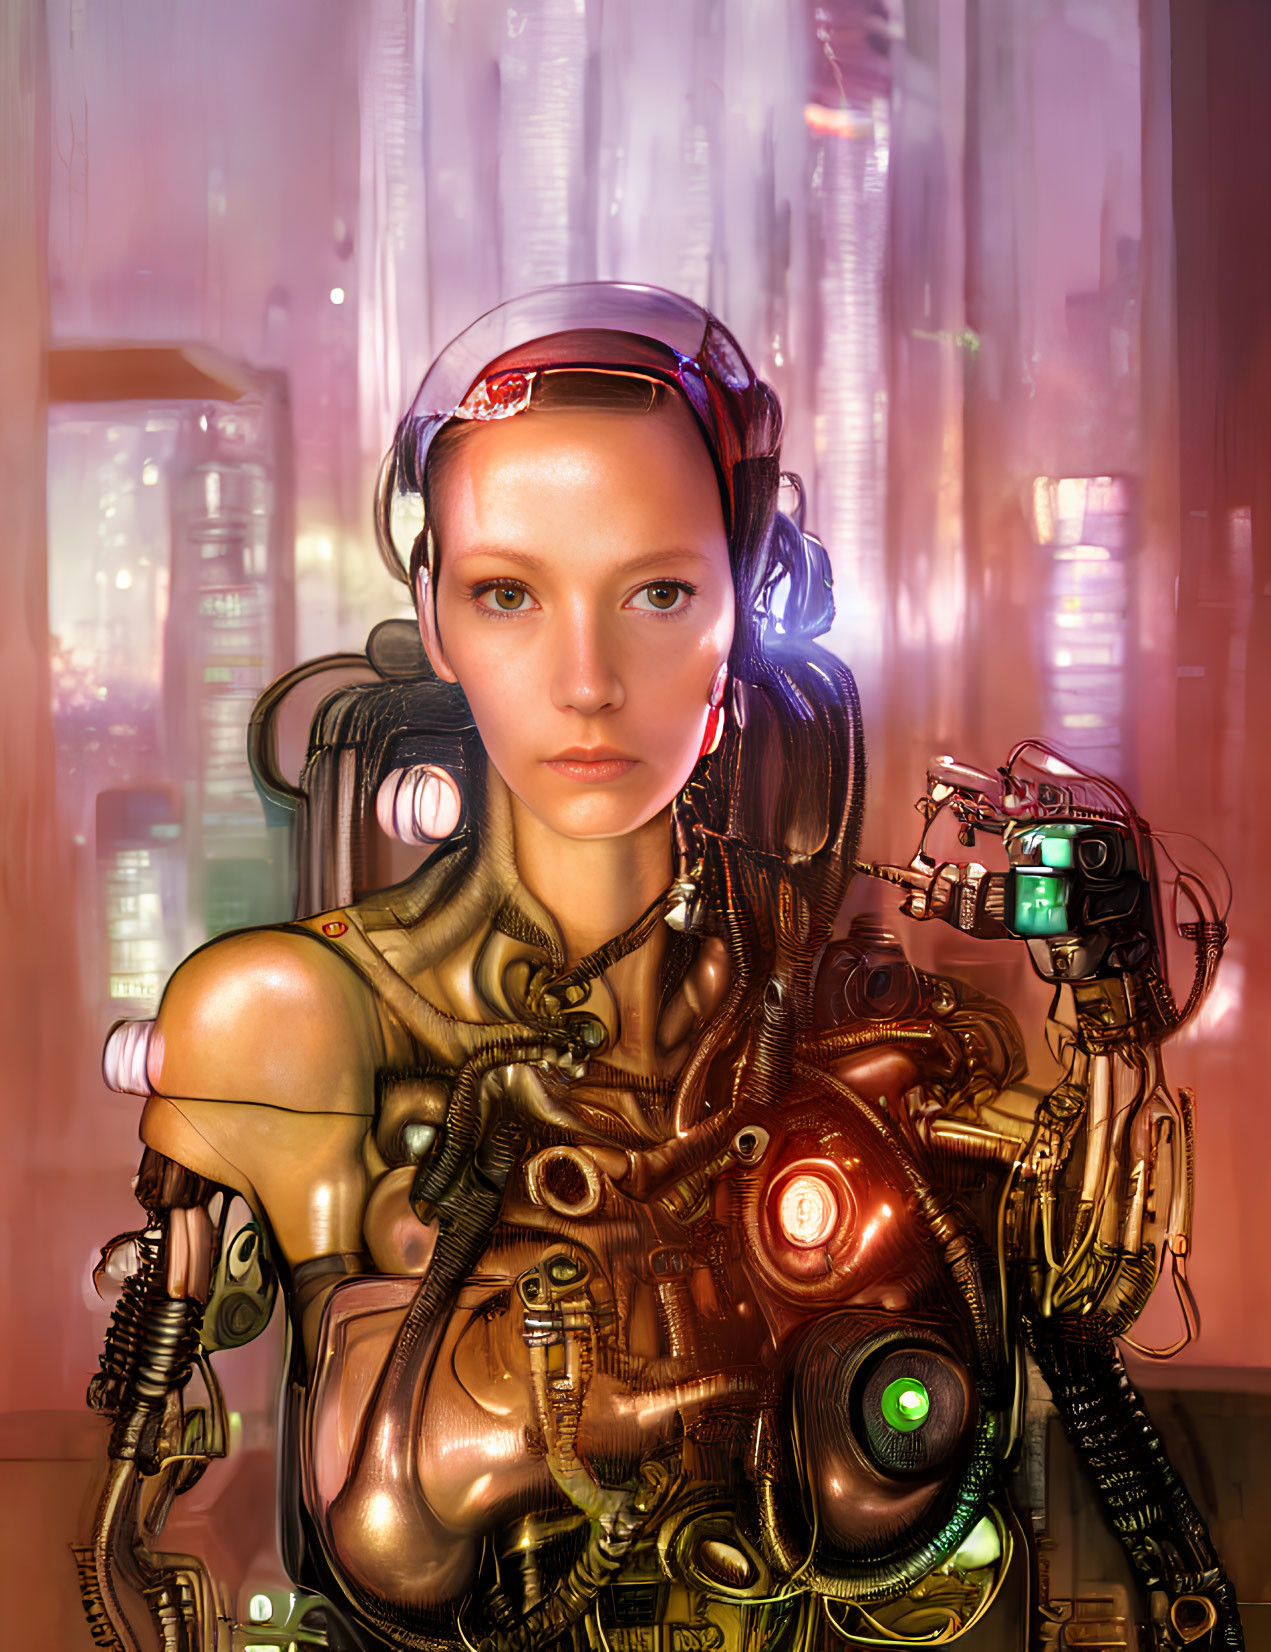 Futuristic cyborg woman with intricate mechanical details in neon-lit cityscape